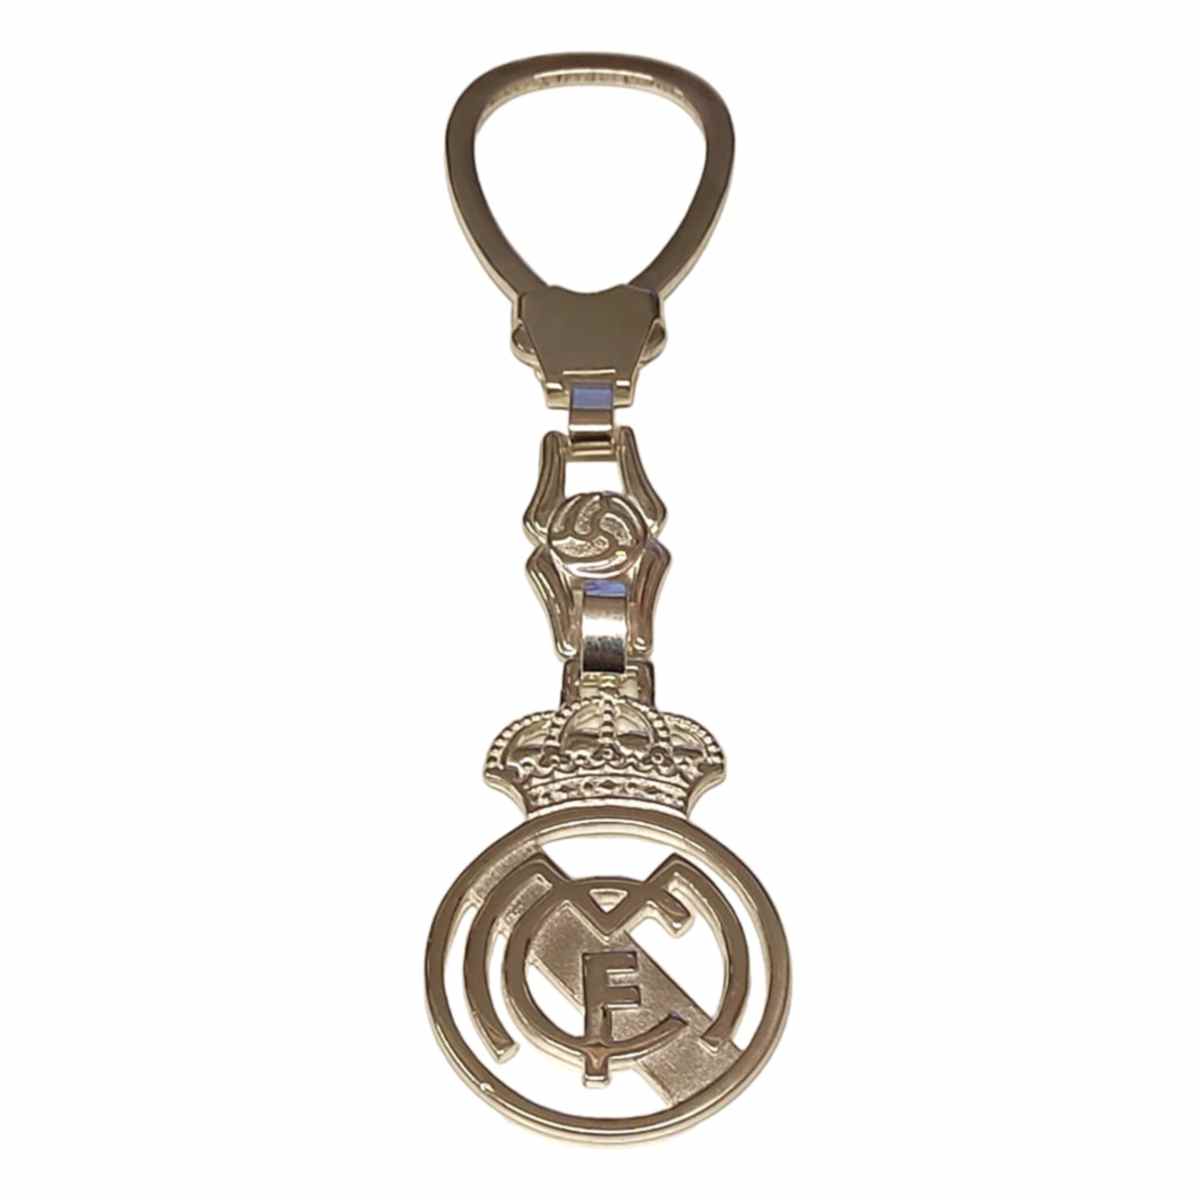 SILVER KEYCHAIN REAL MADRID